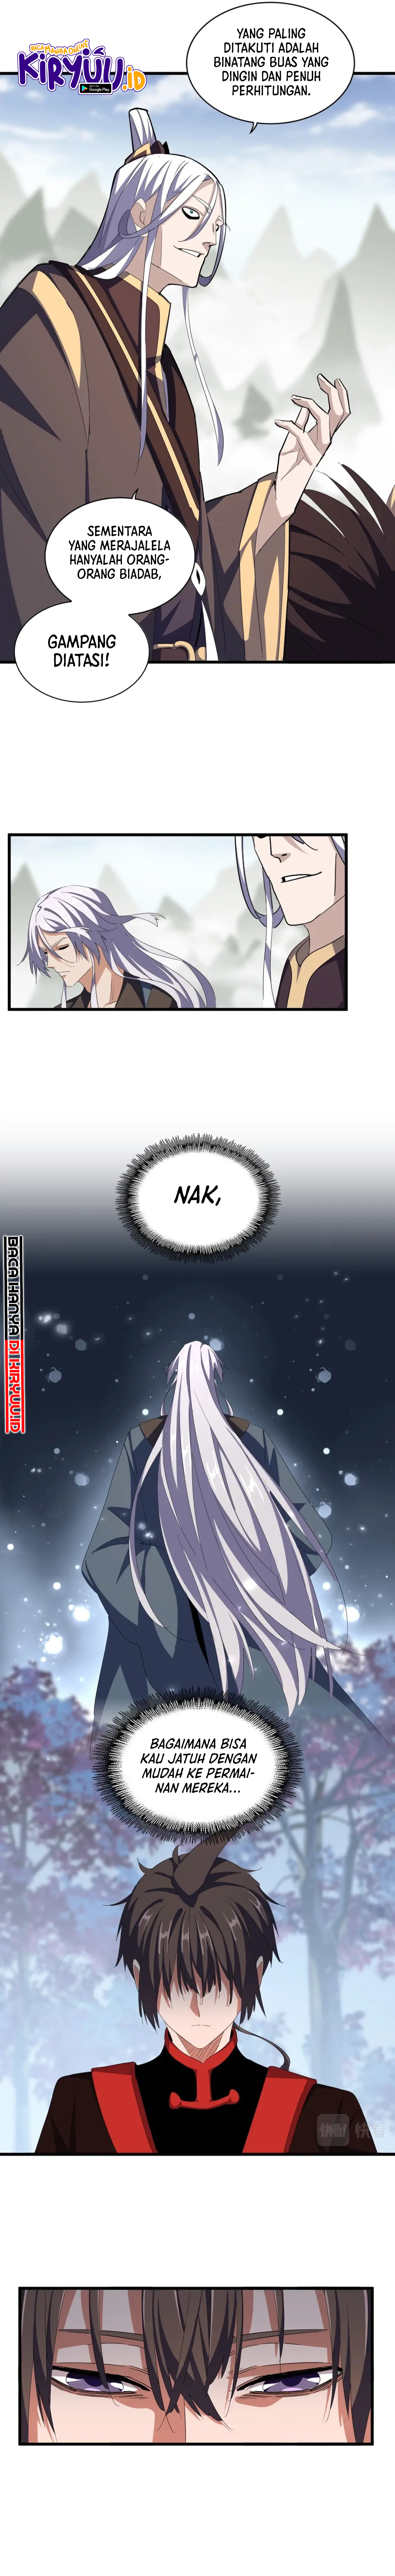 Magic Emperor Chapter 342 Image 3